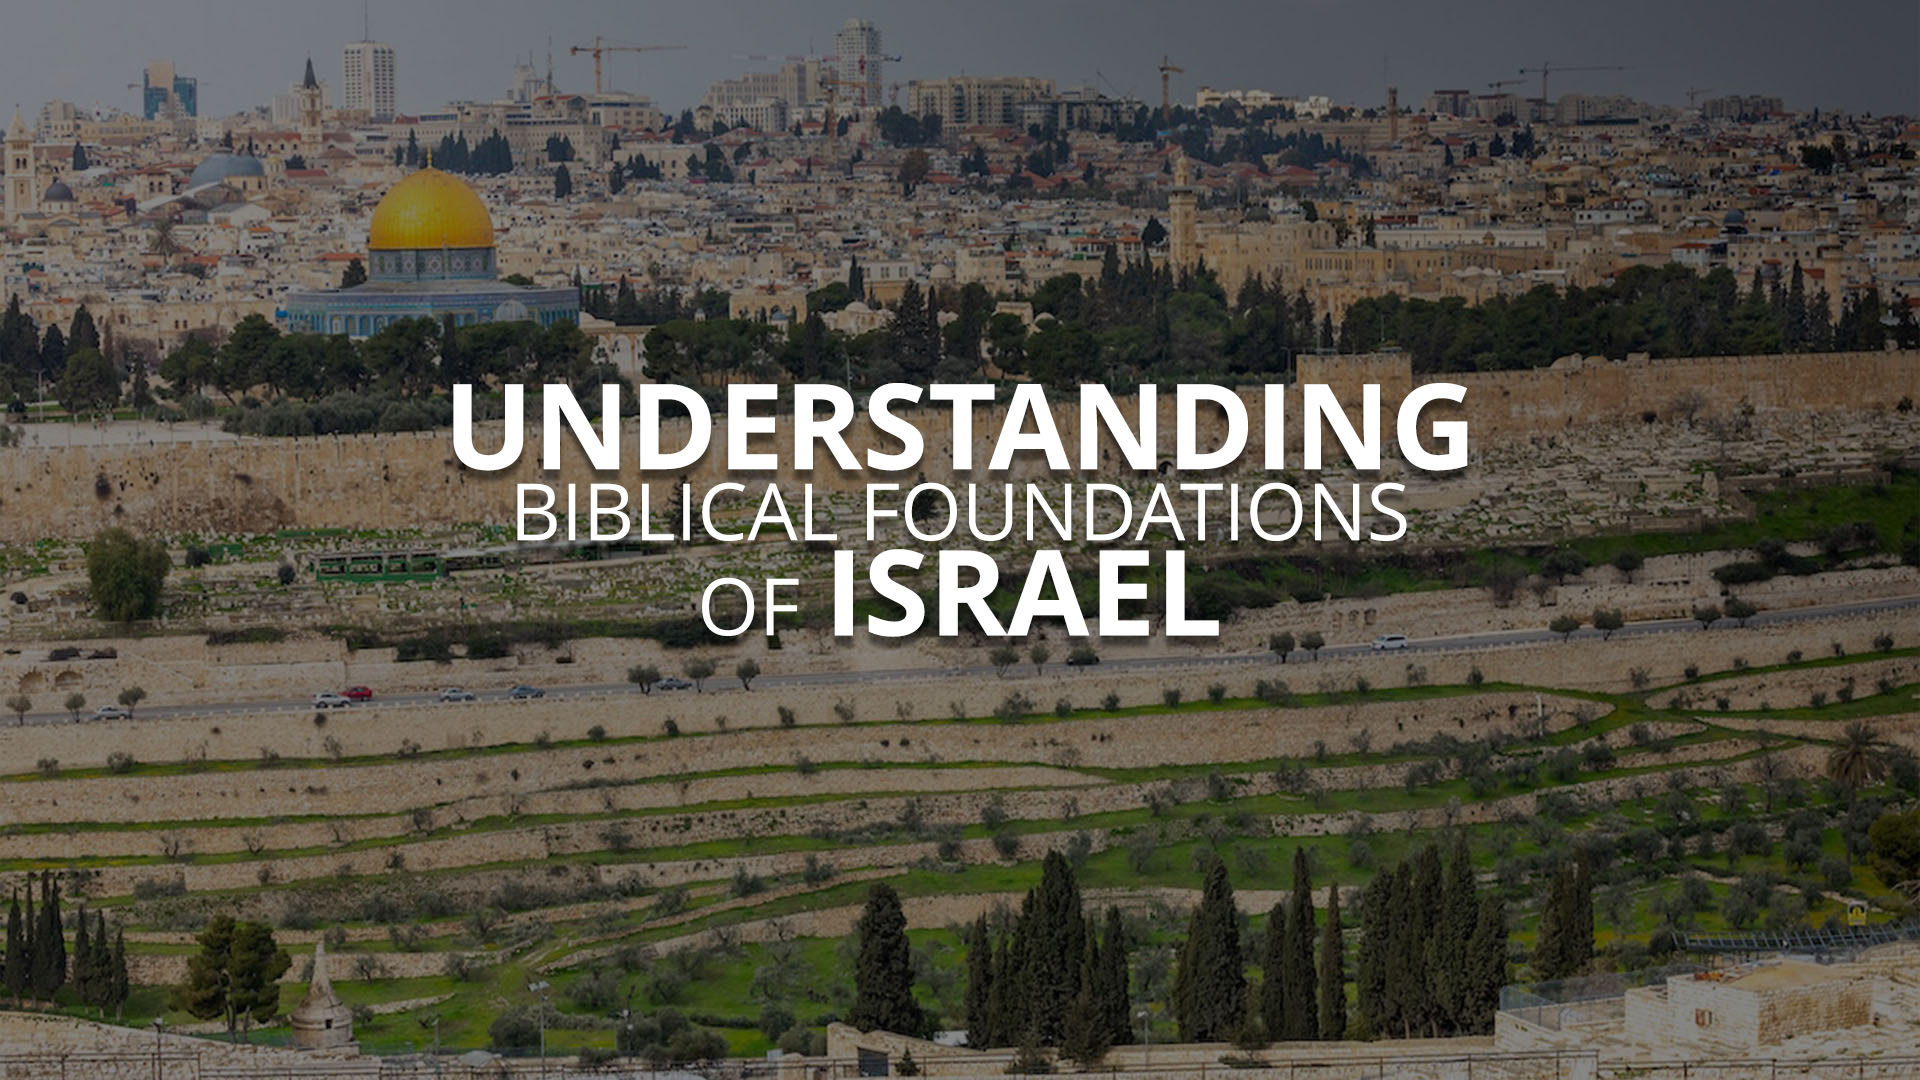 Understanding the Biblical Foundations of Israel from a Messianic rabbinic perspective